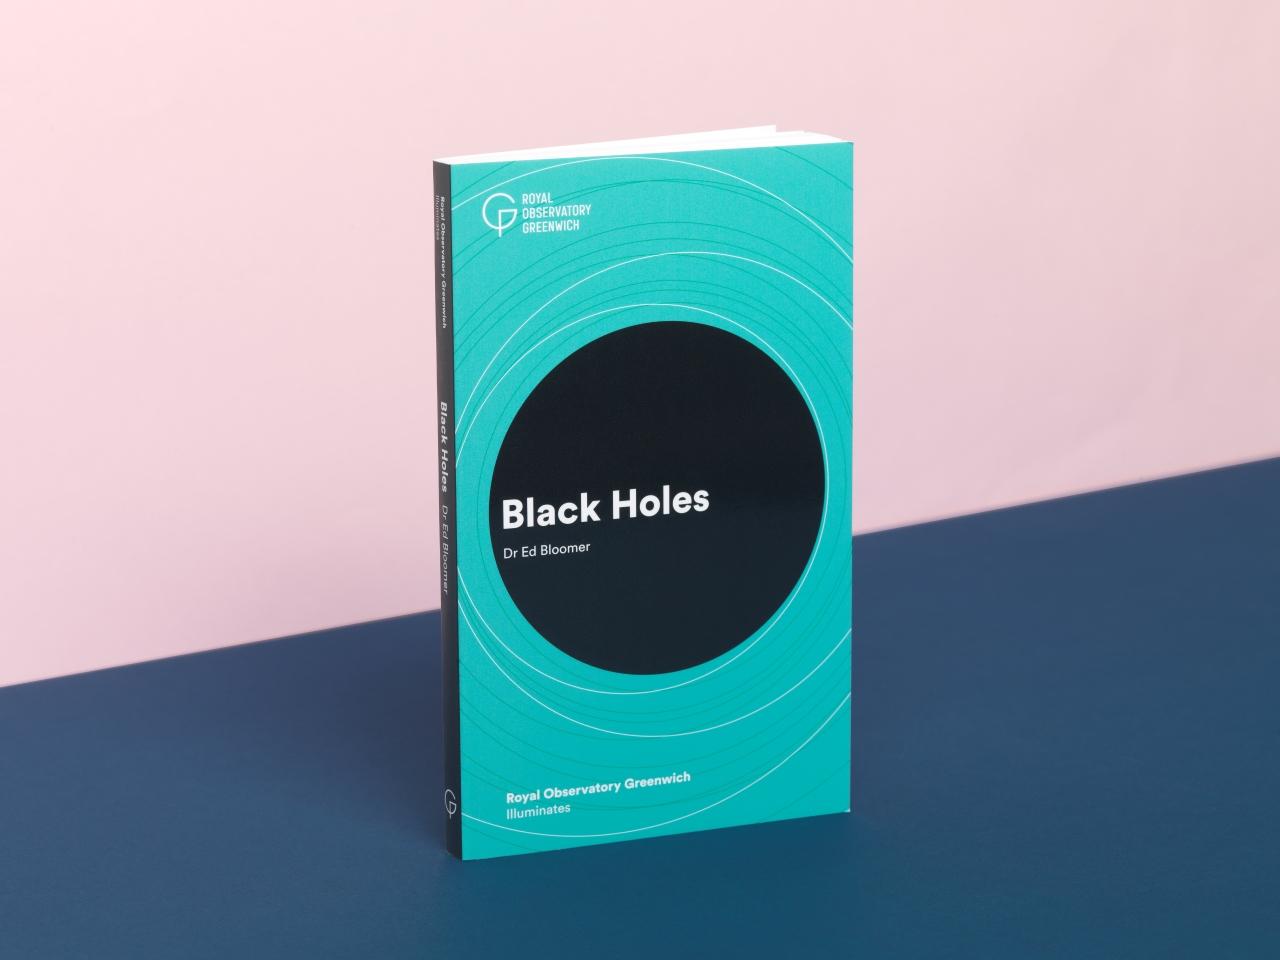 The book cover for Black Holes by Dr Ed Bloomer, part of the Illuminates series by Royal Observatory Greenwich